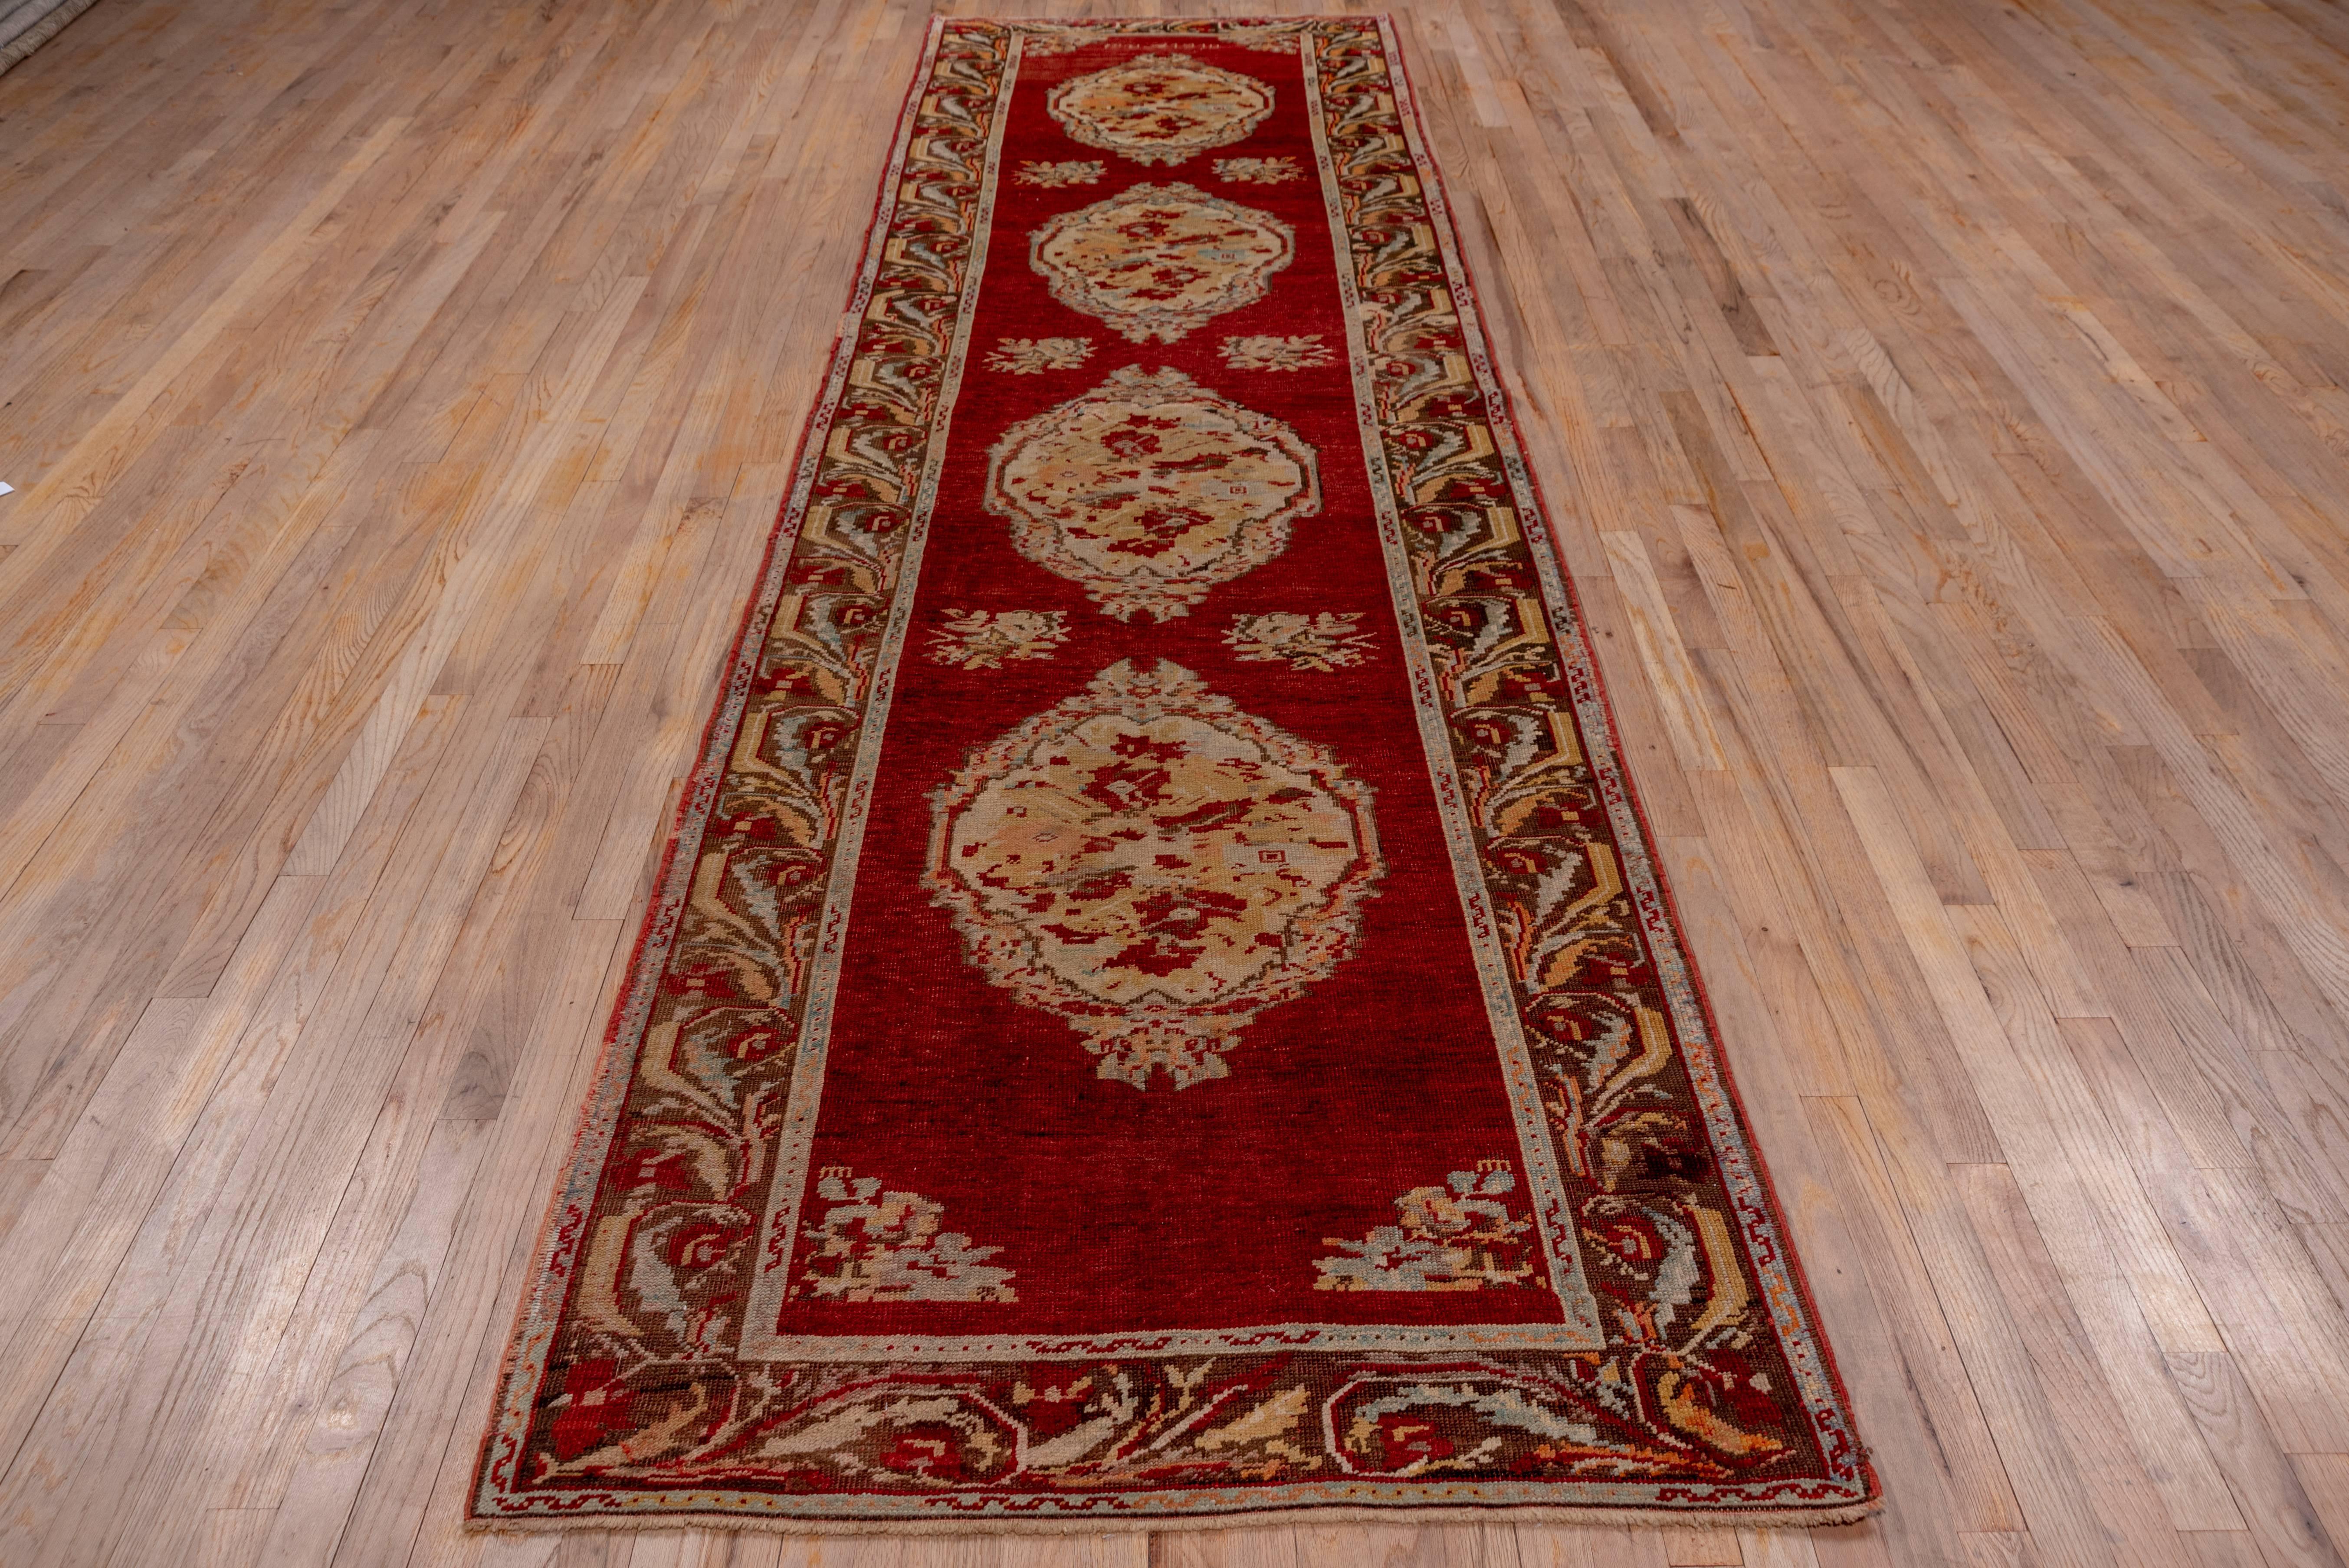 Four oval medallions in French floral style decorate the red field of this western Turkish runner. Small rose bunches fill in along the sdies of the field. A semi-realistic acanthus leaf border frames the whole. The style is reminiscent of Karabaghs